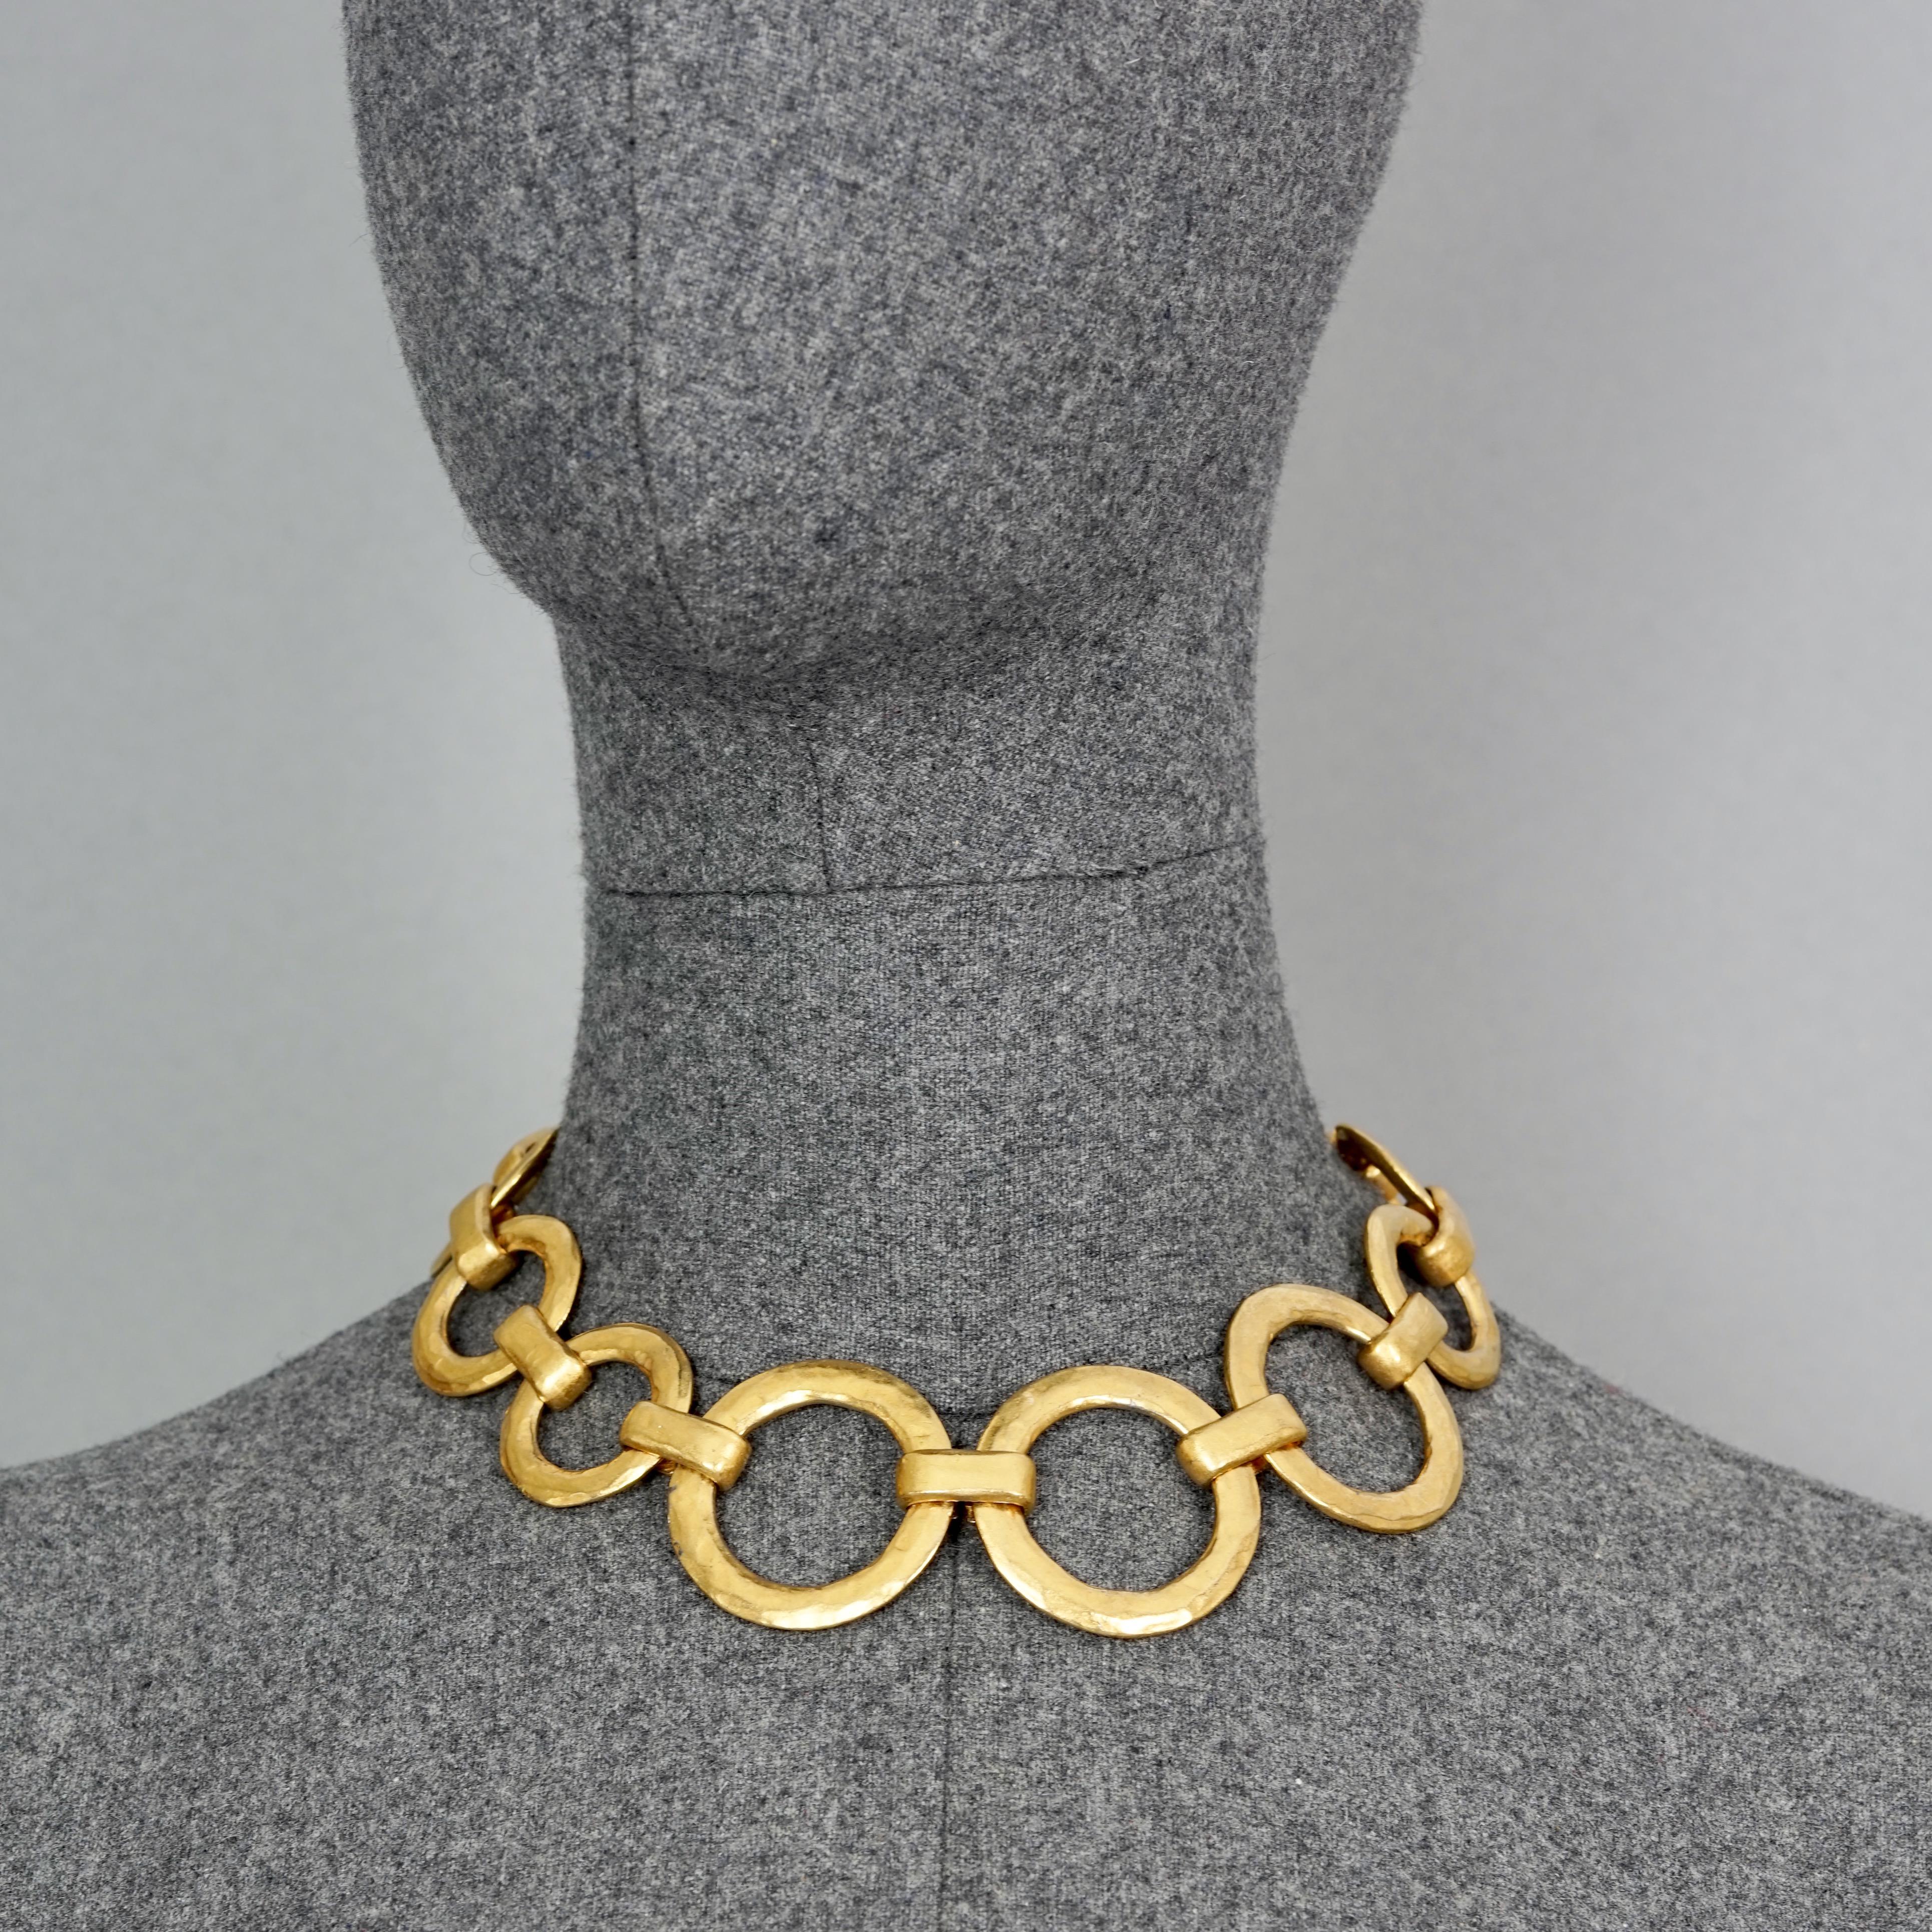 Vintage EDOUARD RAMBAUD Gilt Circular Link Necklace

Measurements:
Height: 1.57 inches (4 cm)
Wearable Length: 16.53 inches (42 cm)

Features:
- 100% Authentic EDOUARD RAMBAUD.
- Hammered gilt circular link necklace
- Gold tone hardware.
- Signed